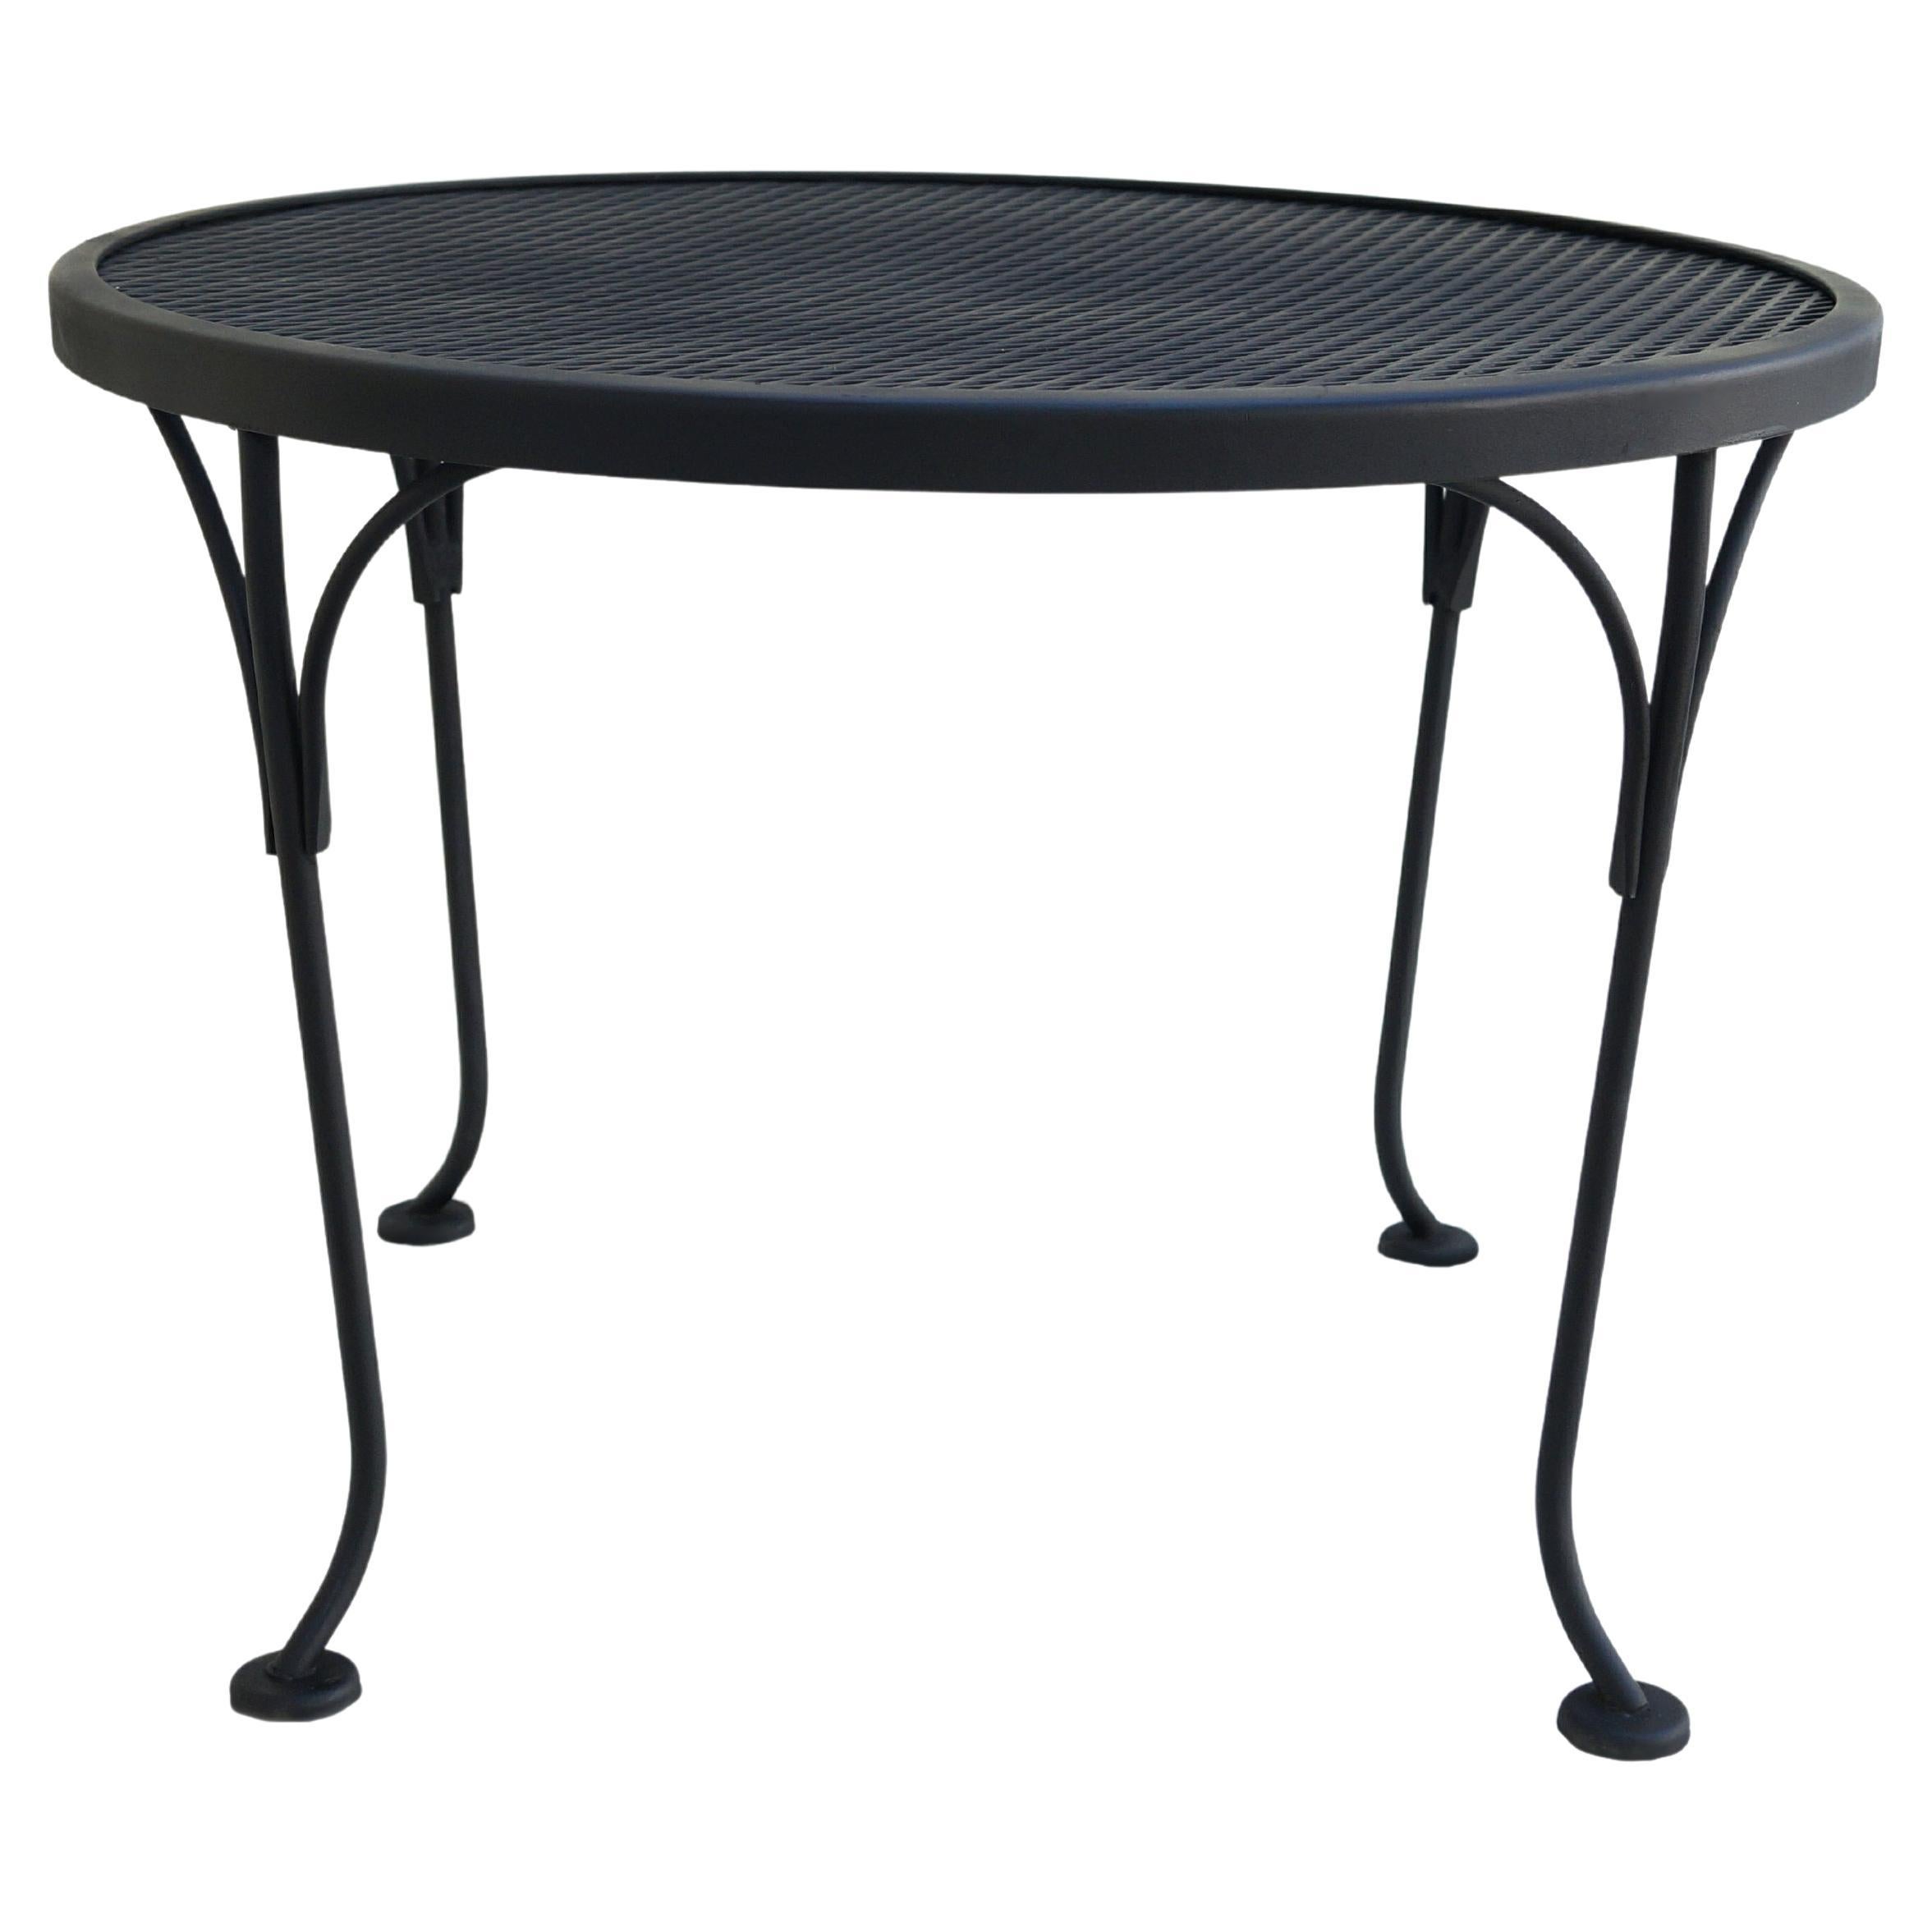 Russell Woodard Furniture Round Black Wrought Iron Patio Coffee or Side Table For Sale